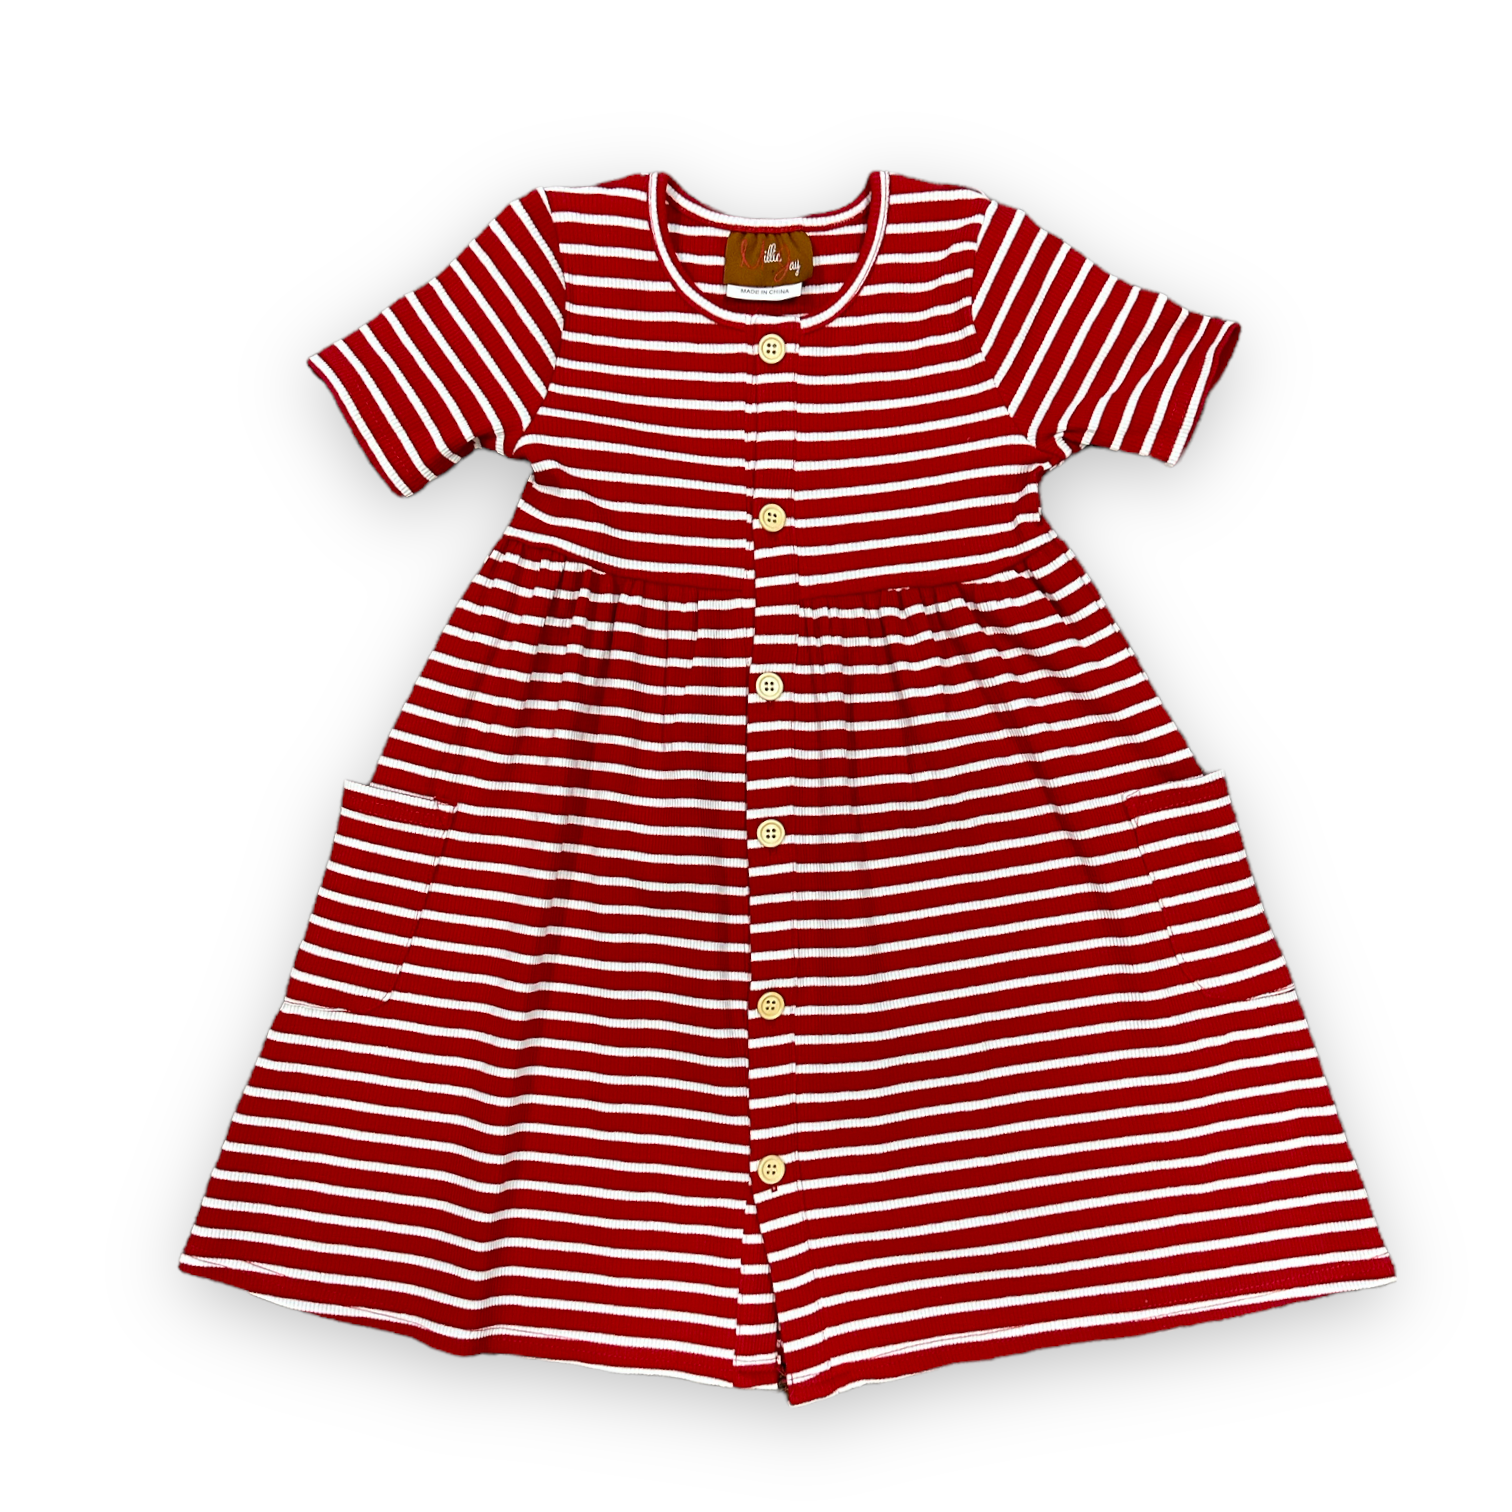 Millie Jay Ribbed Dress - Rose Stripe - Ruffle Me This